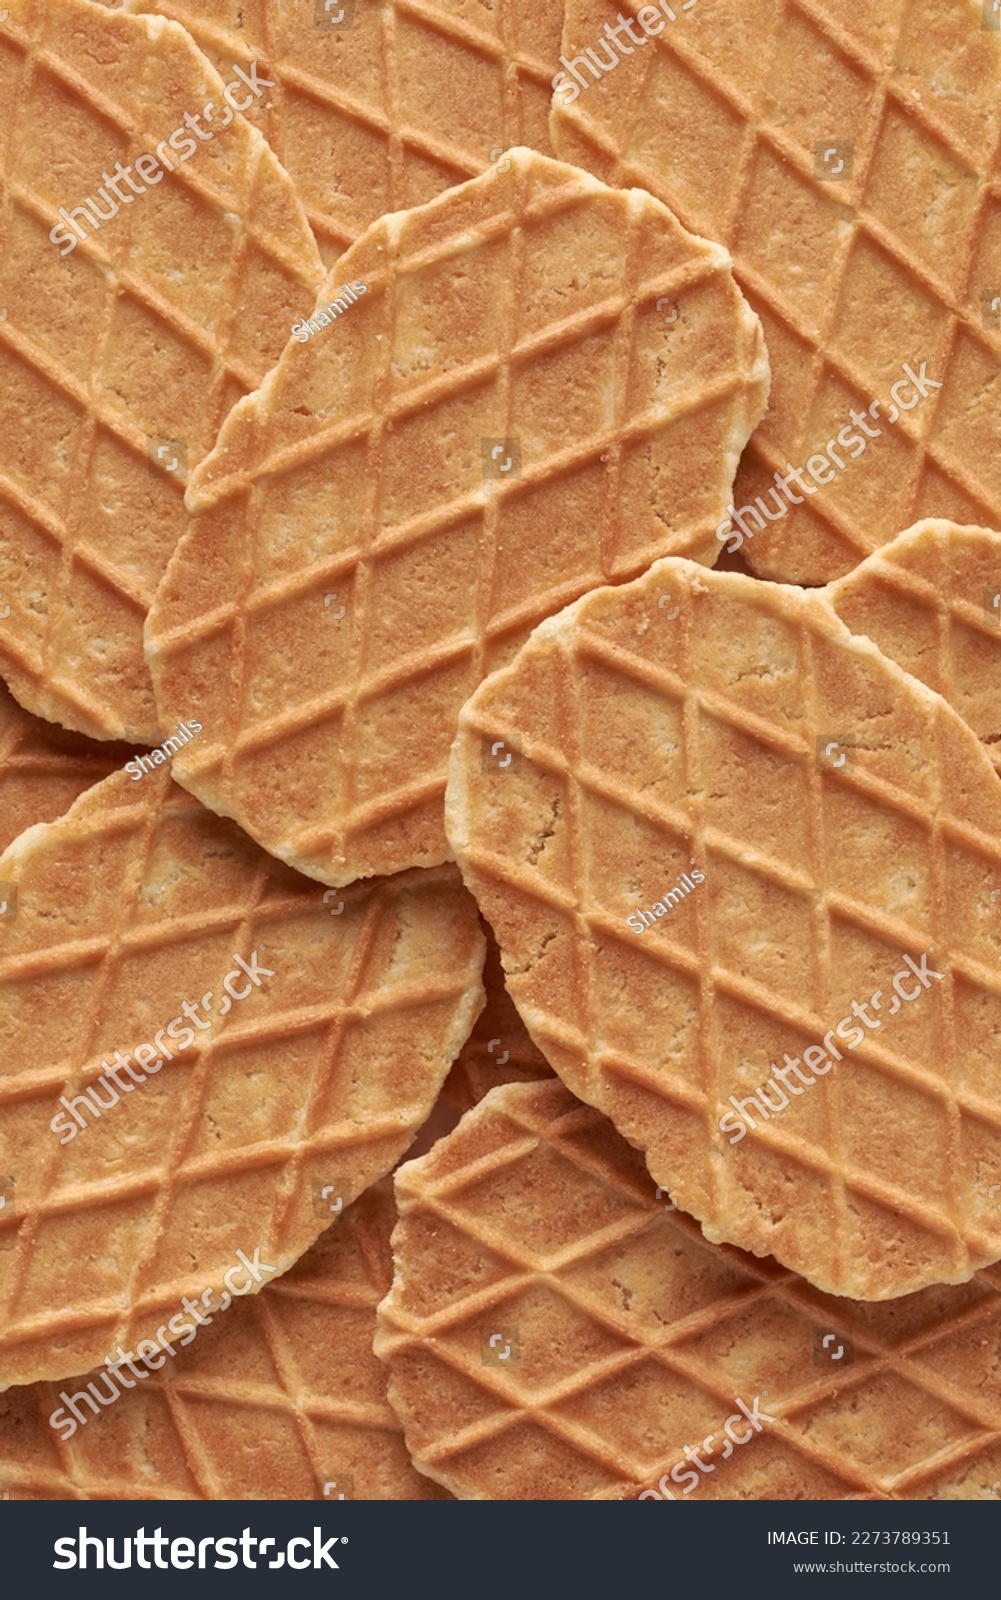 waffles, crunchy cookies snacks in full frame, sweet delicious wafer food background texture, close-up view taken straight from above #2273789351